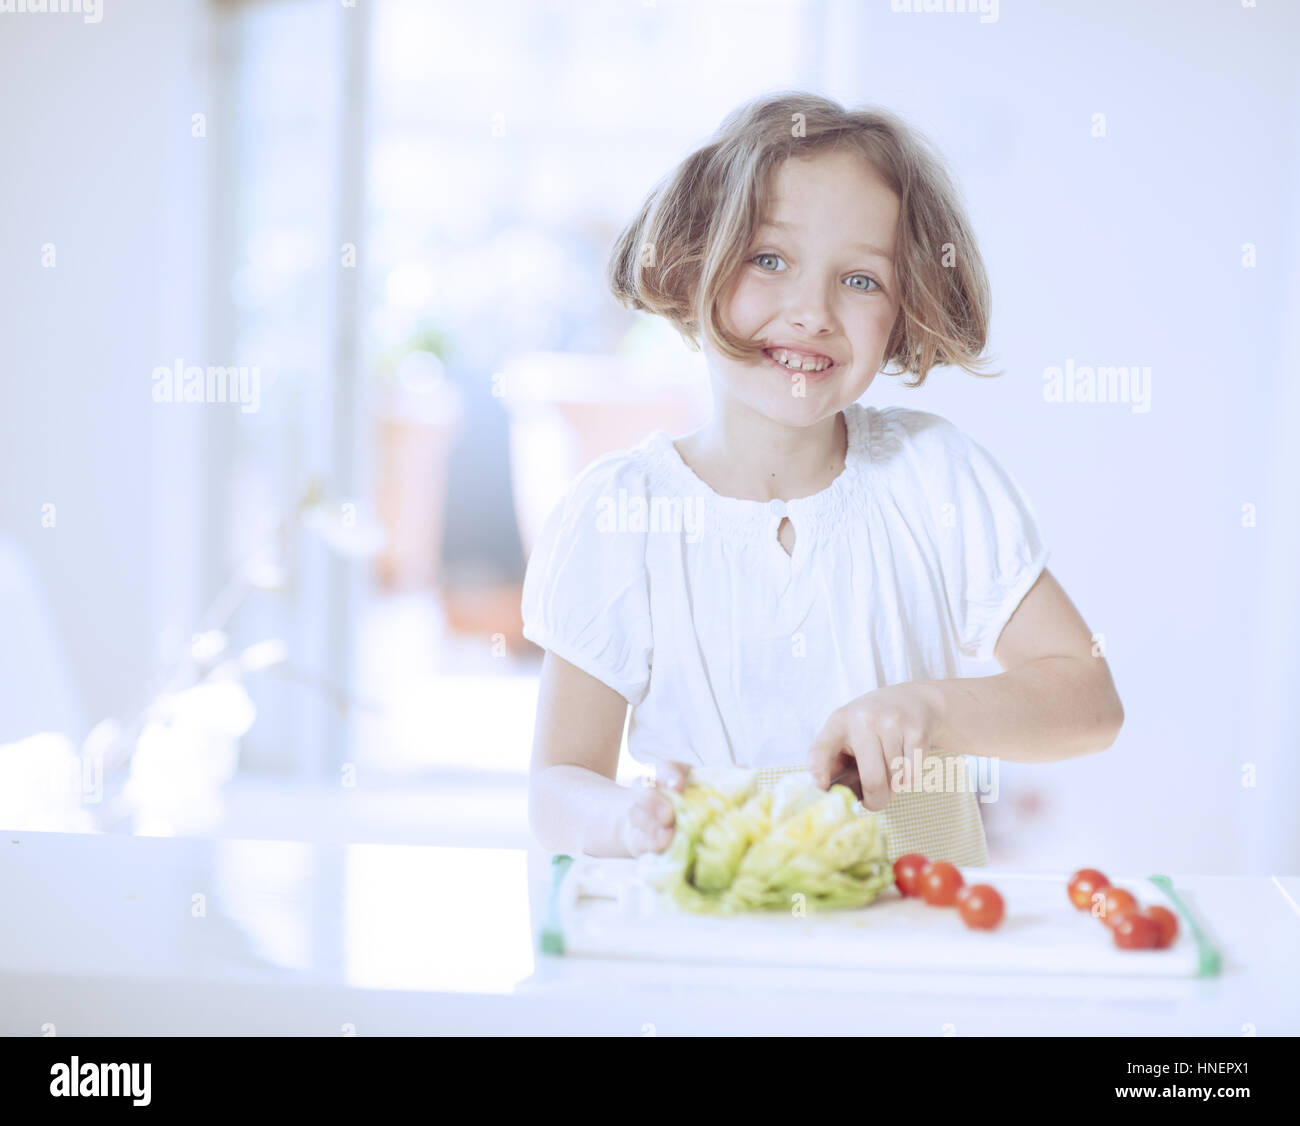 Young girl making a salad Stock Photo